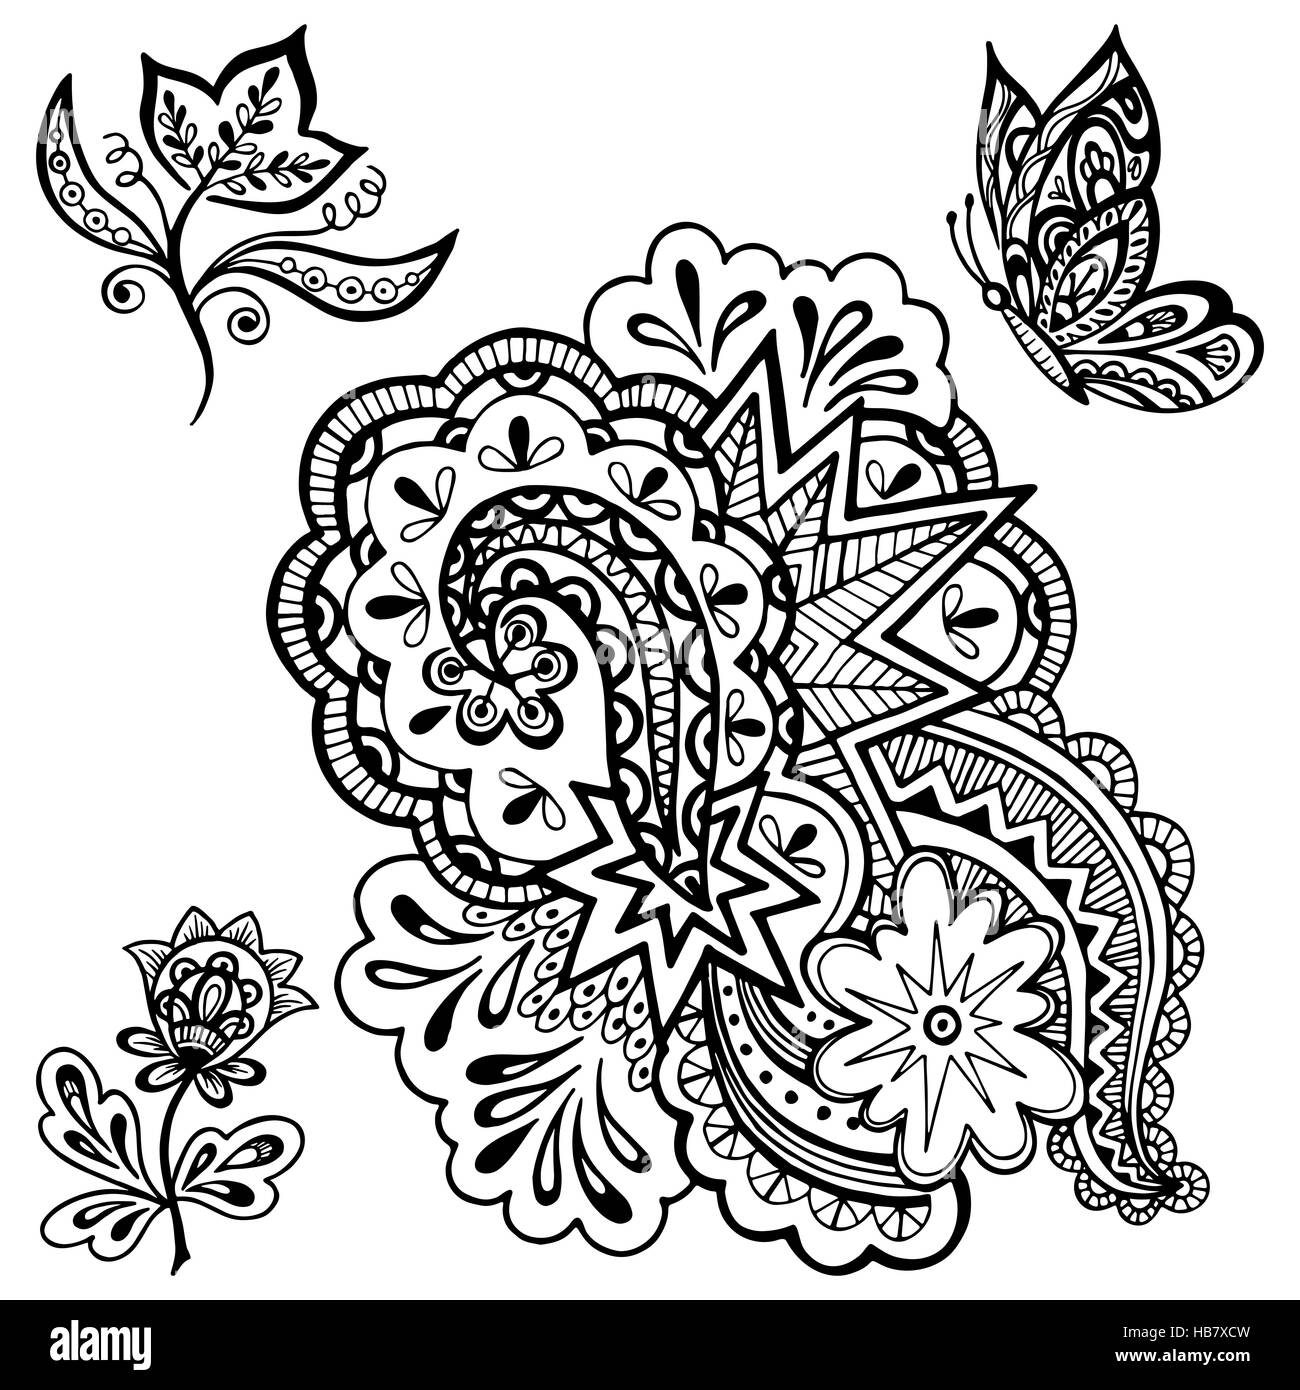 Patterns, Flowers and Butterfly Contours Stock Photo